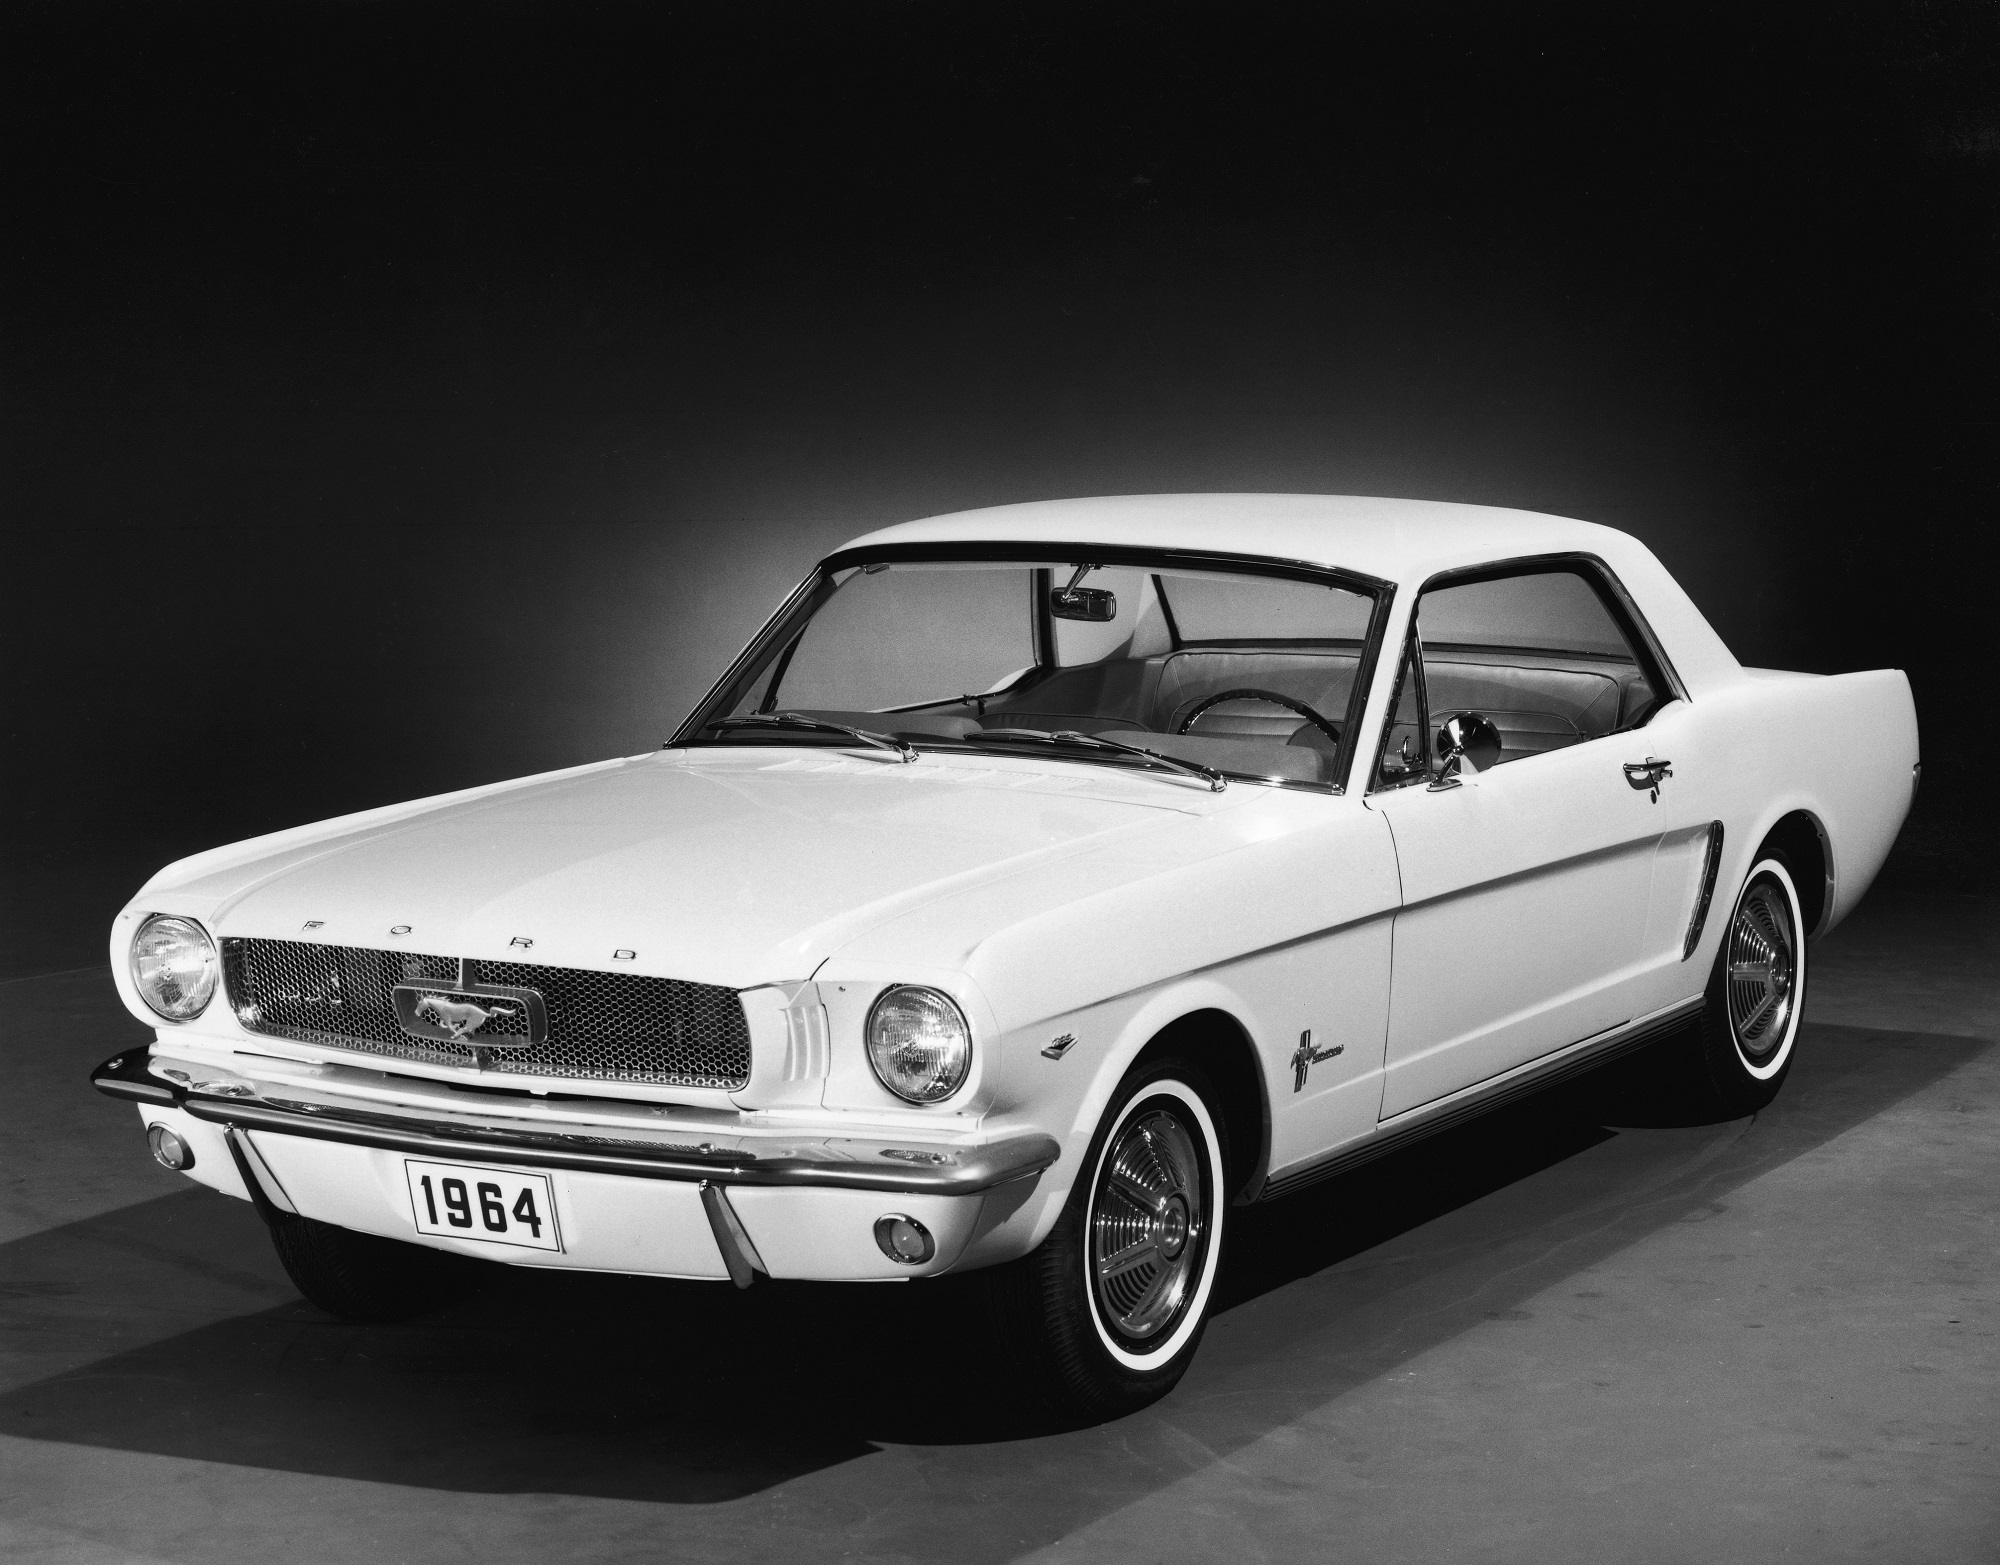 The Ford Mustang, like this 1965 model, took its name from a famous WWII fighter plane.